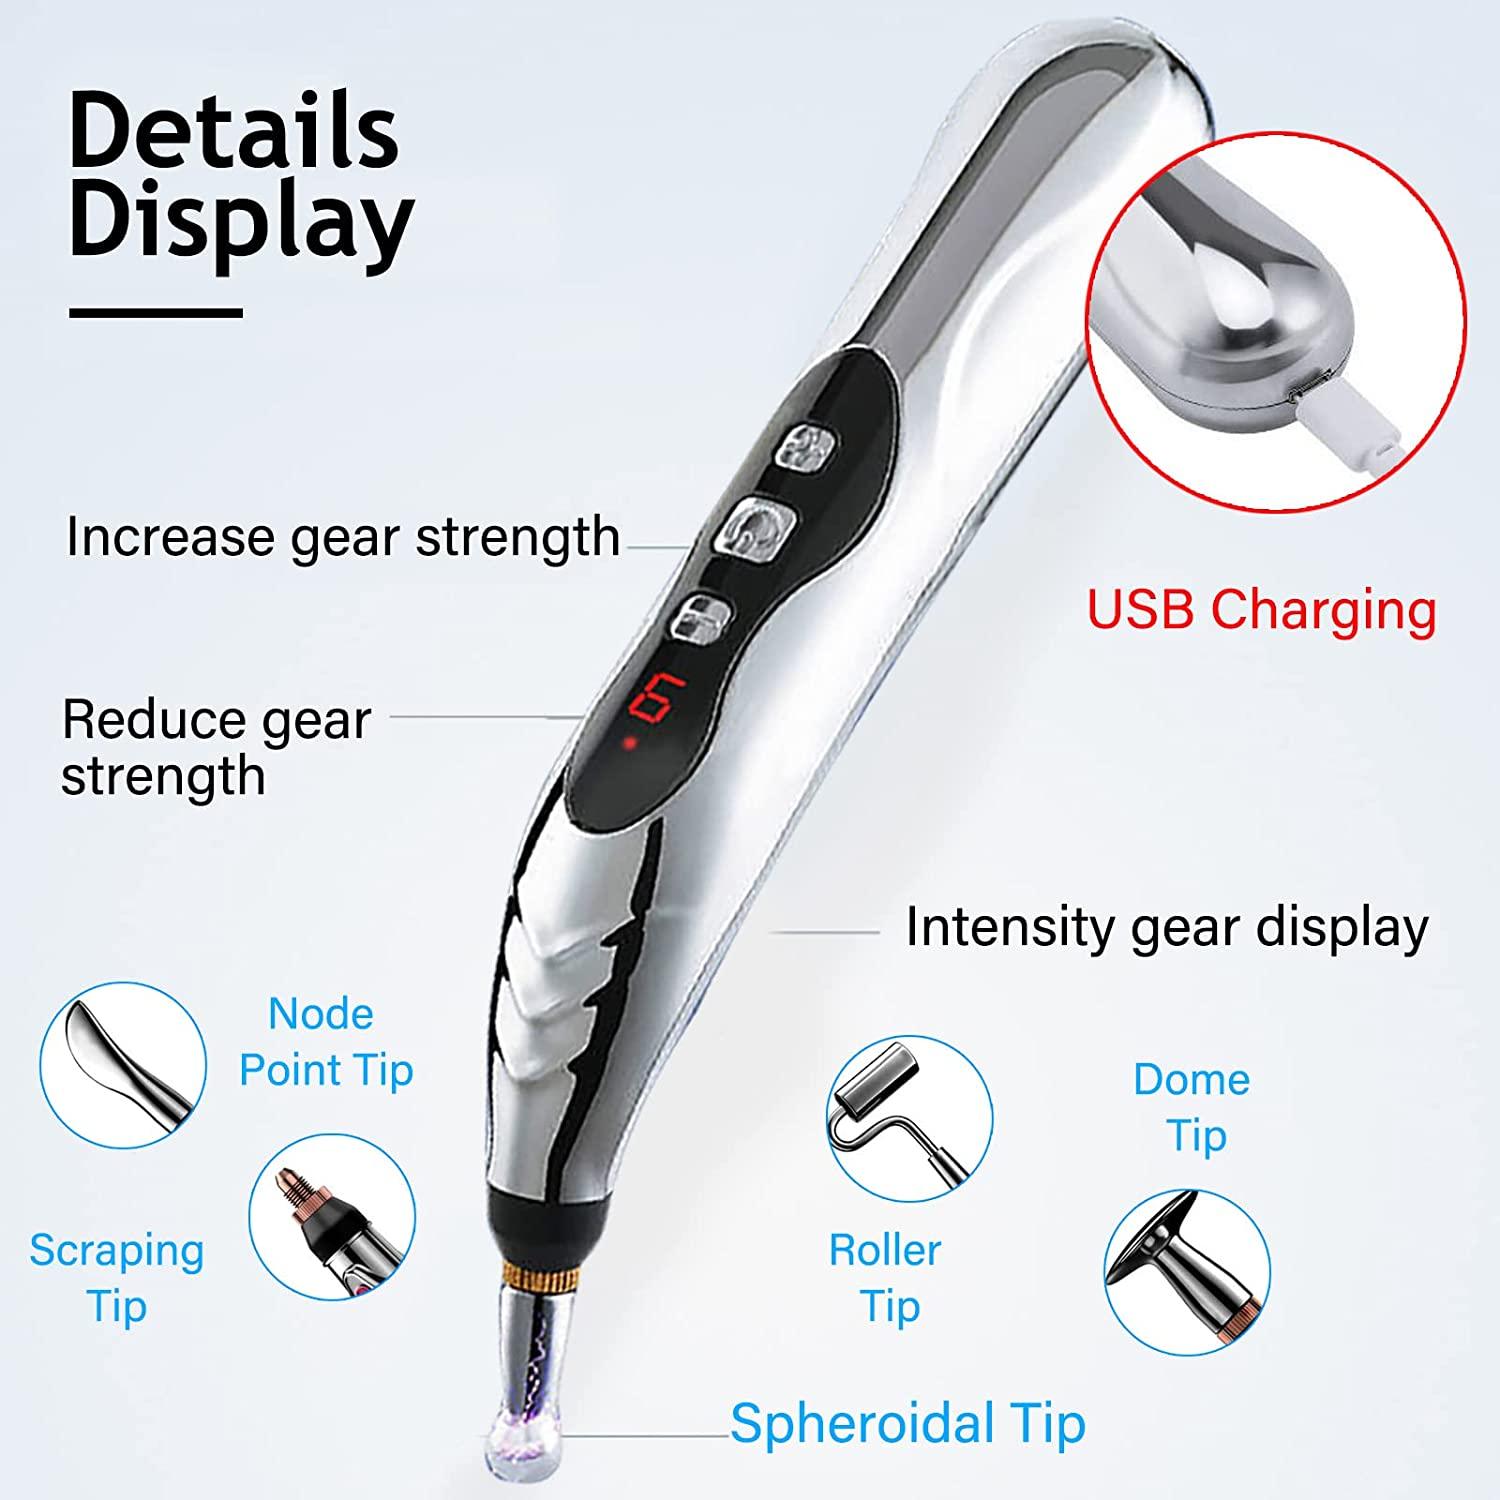 5-in-1 Acupuncture Pen, Electronic Acupuncture Pen, Pain Relief